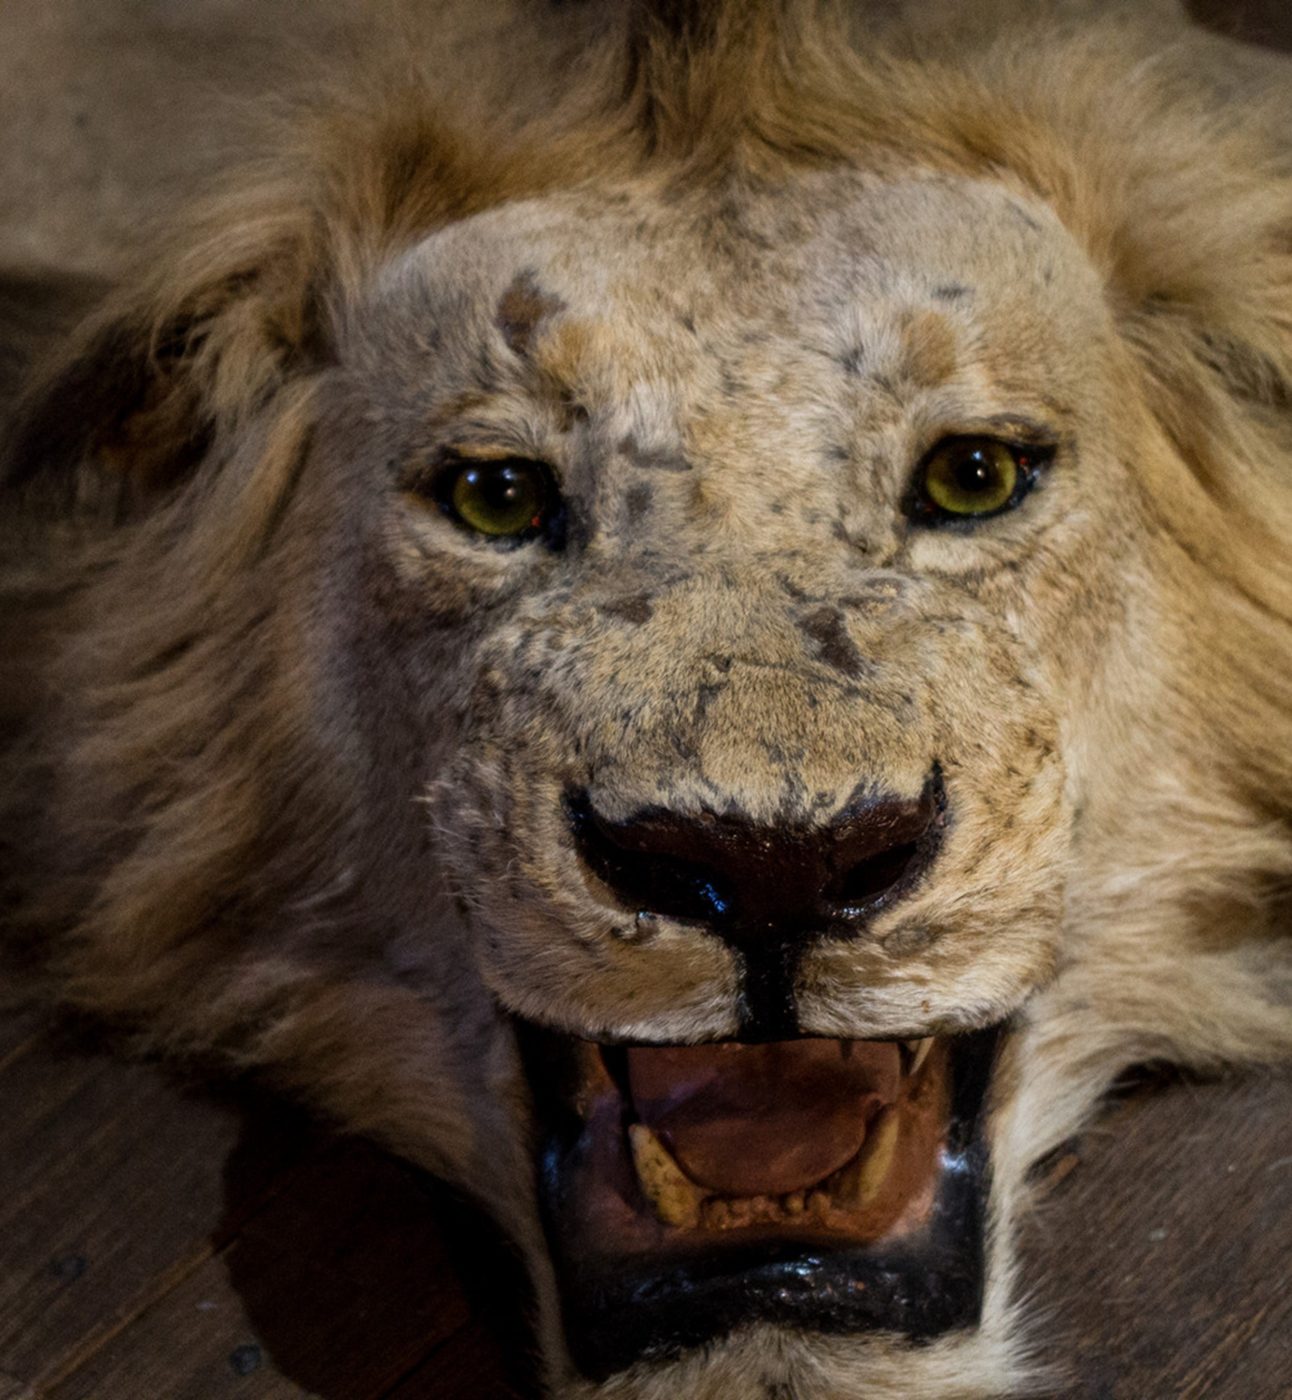 The head of a dead lion